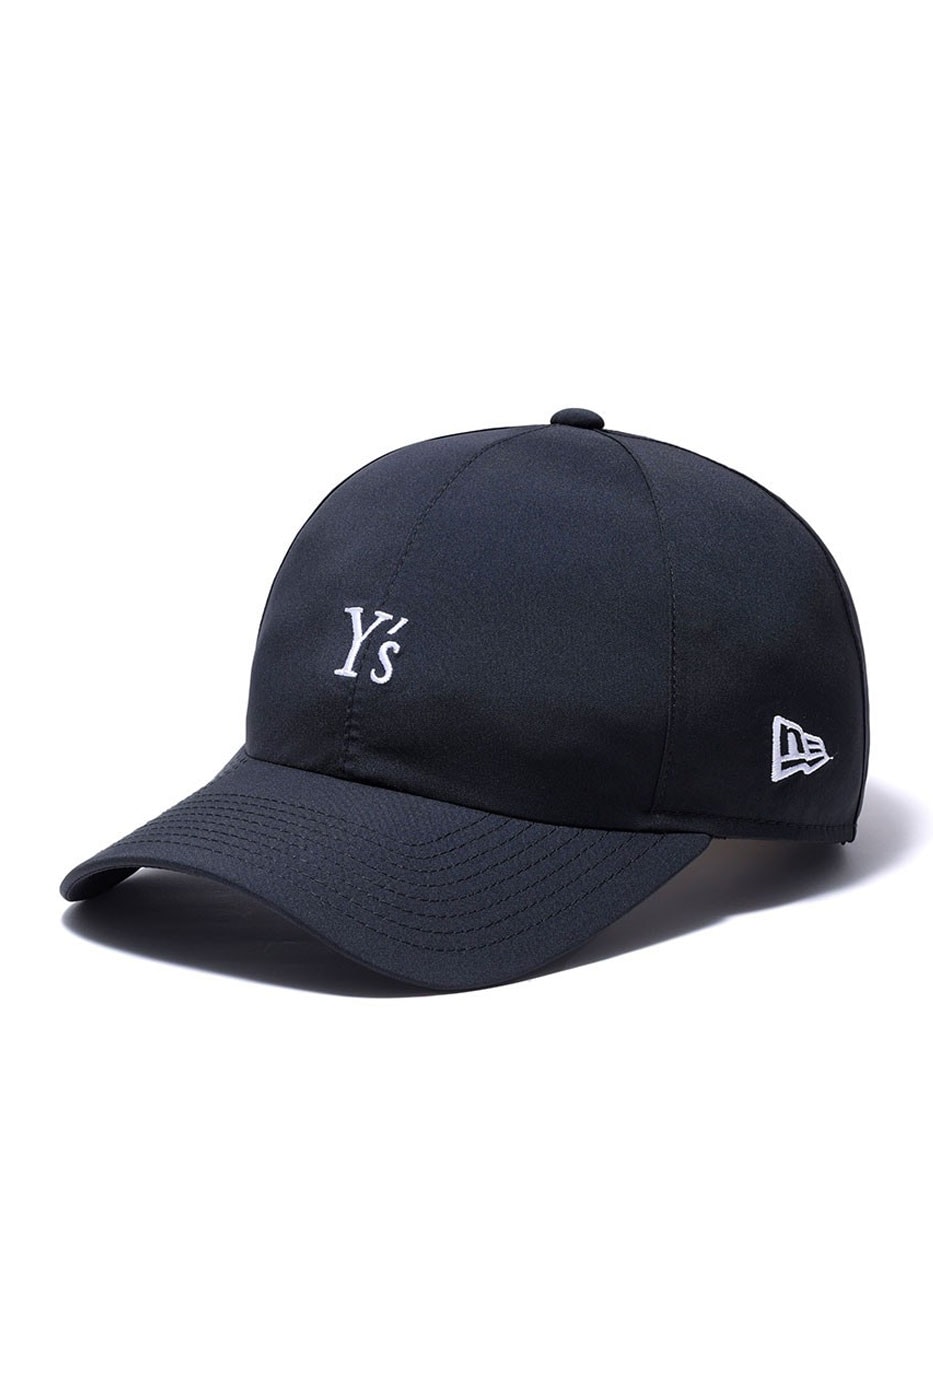 Y's and New Era® Reunite for SS22 Essentials | Hypebeast